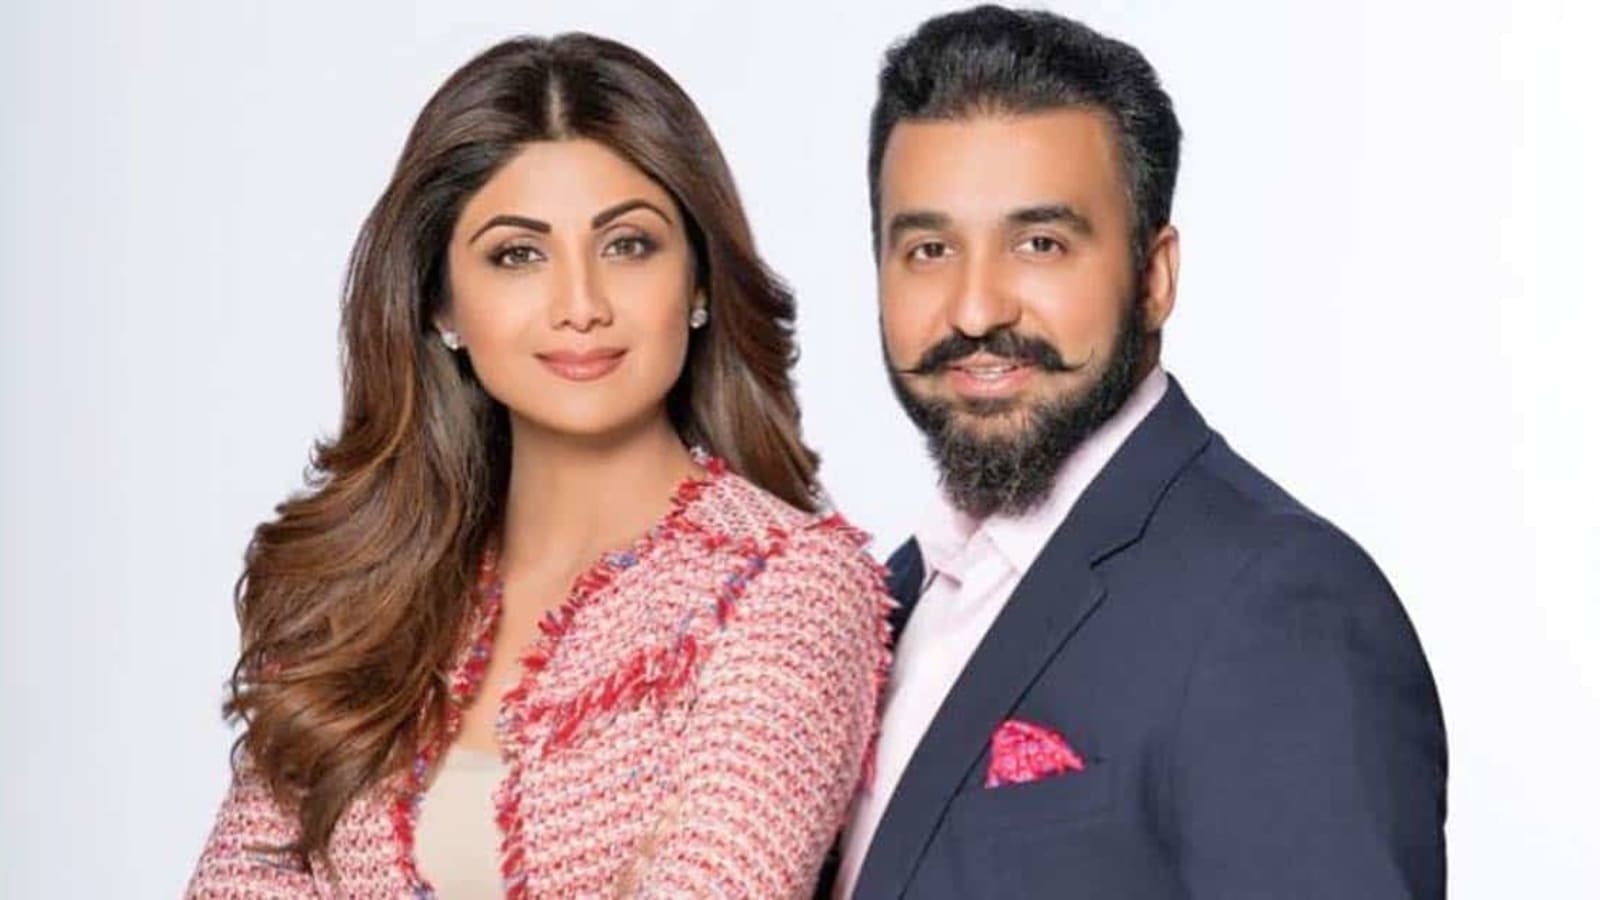 Shilpa Shetty Bf Xx - Shilpa Shetty on FIR against her, Raj Kundra in cheating case: 'It pains me  to see my reputation is getting damaged' | Bollywood - Hindustan Times